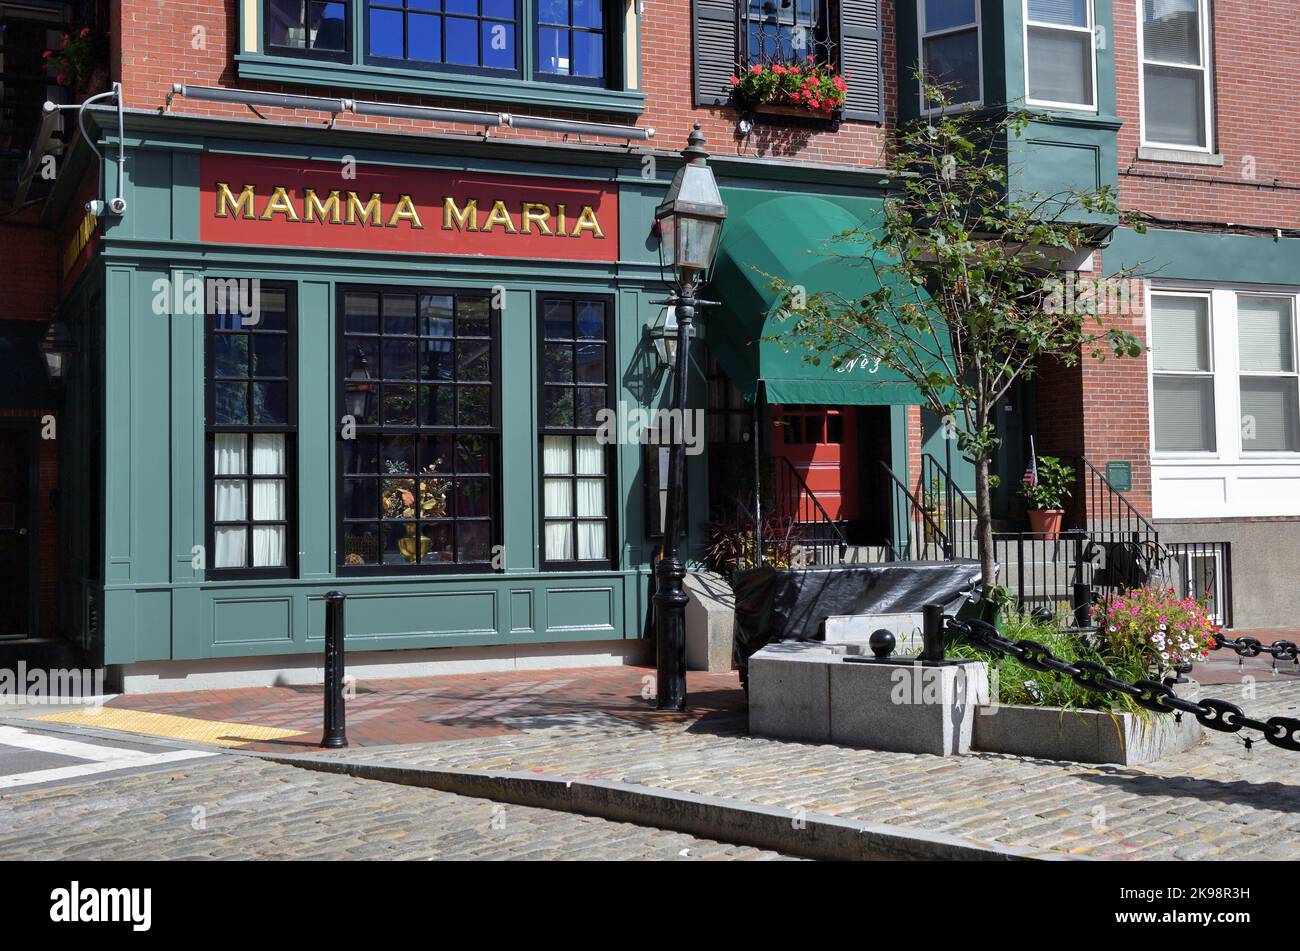 Boston, Massachusetts, USA. North Square in Boston's North End neighborhood. The predominantly Italian-American neighborhood is the oldest in the city. Stock Photo